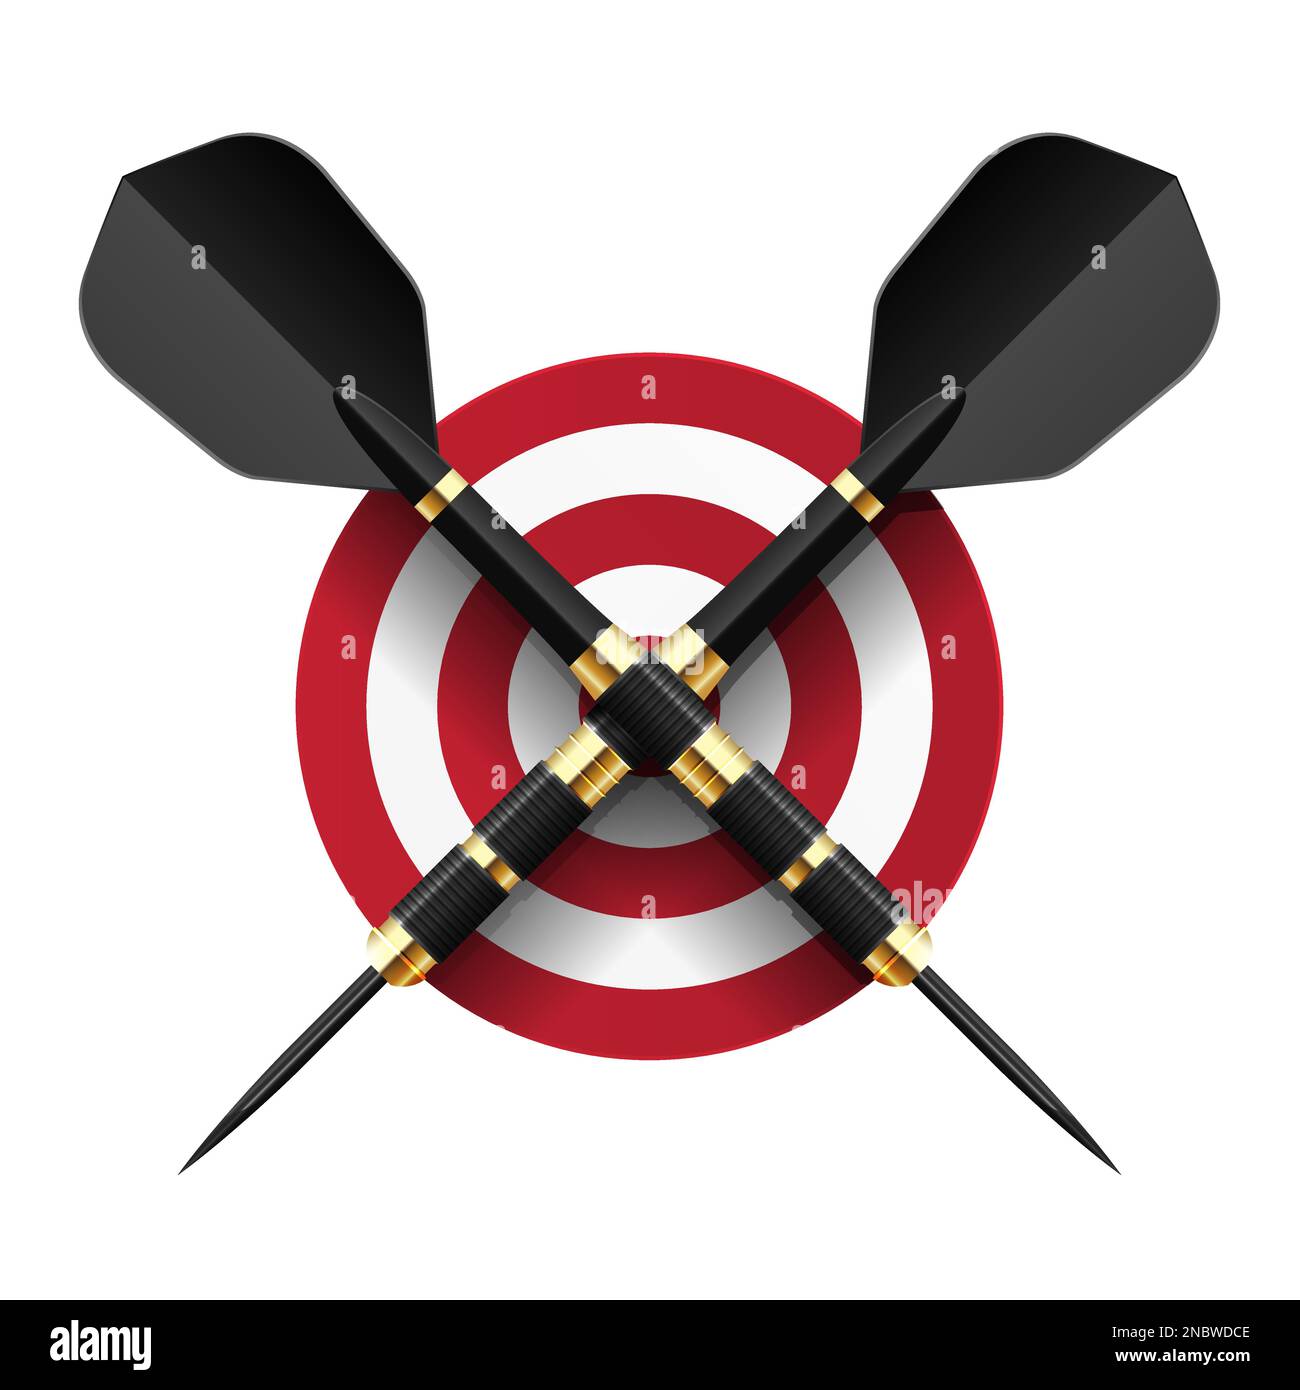 Darts game championship emblem, two crossed darts over simple target or dartboard, vector Stock Vector